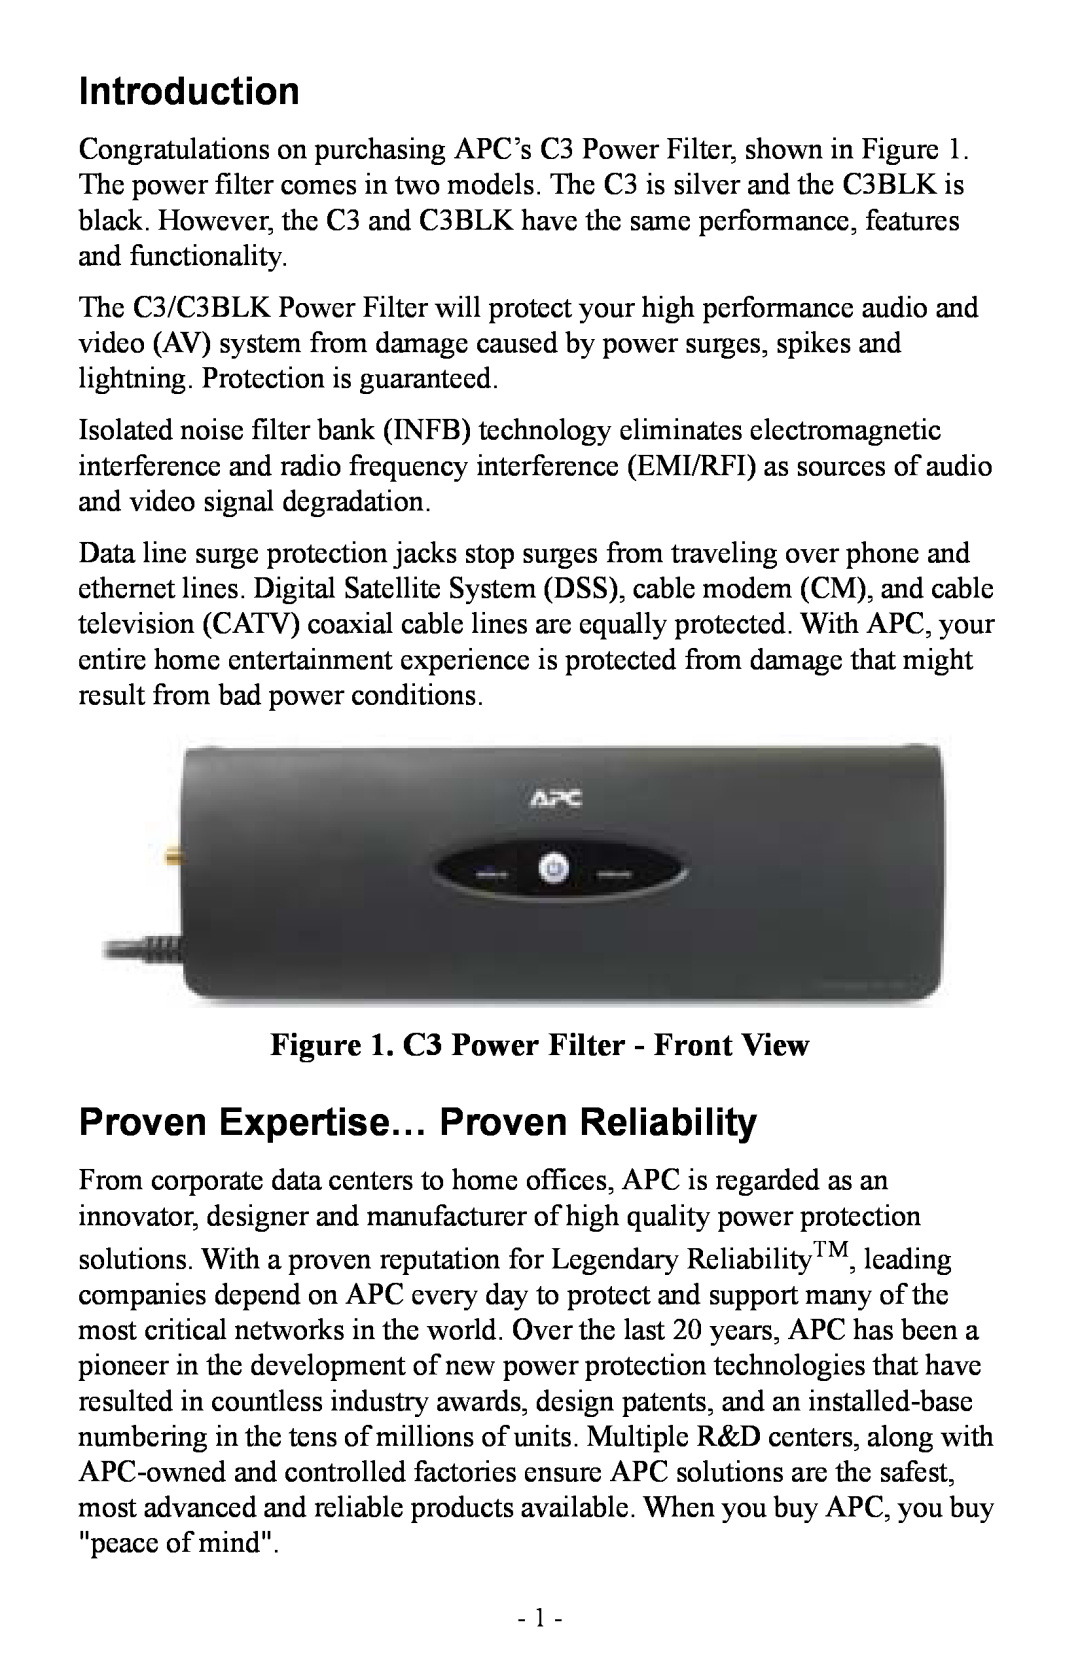 APC Model C3 and C3BLK user manual Introduction, Proven Expertise… Proven Reliability, C3 Power Filter - Front View 